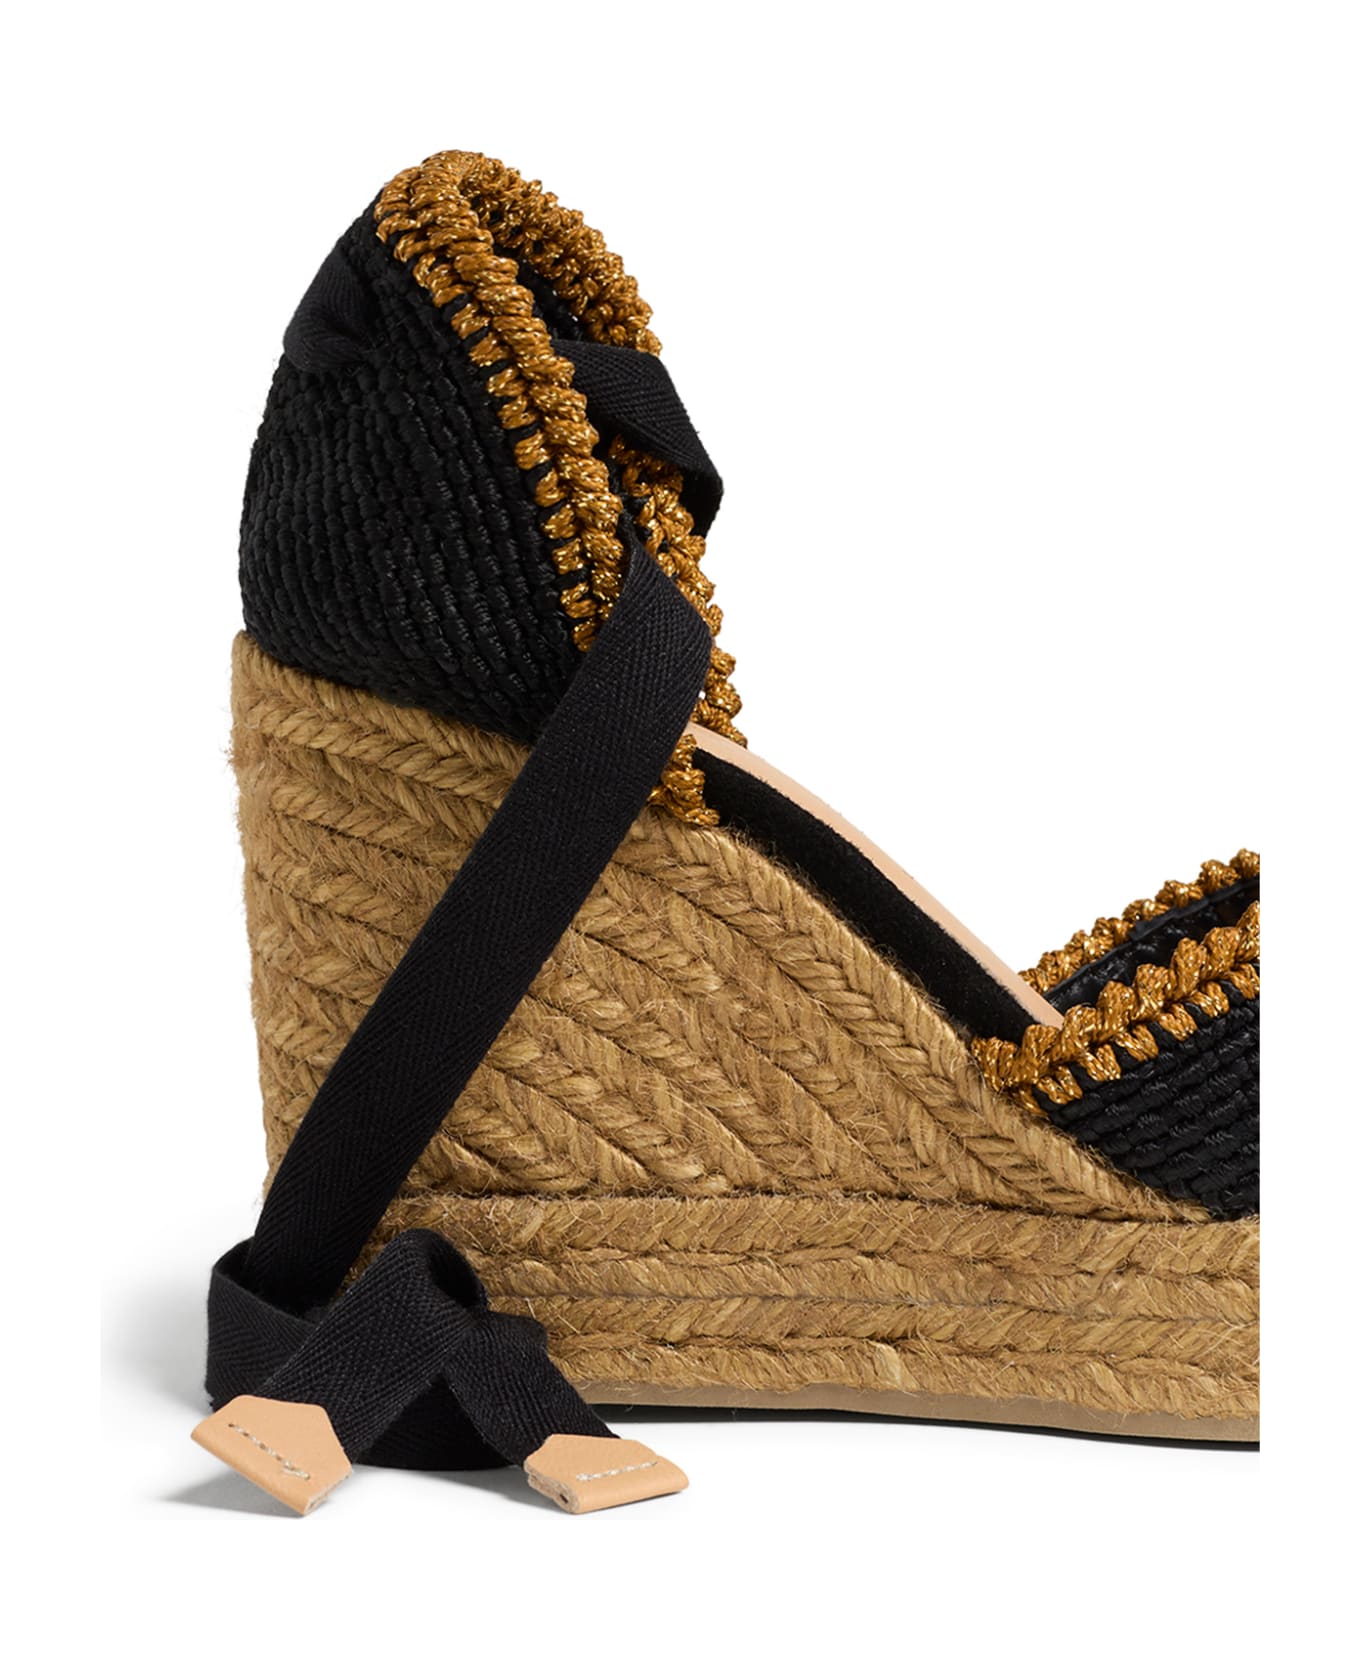 Castañer Espadrilles Coeur With Wedge And Laces - FANTASIA NEGRO